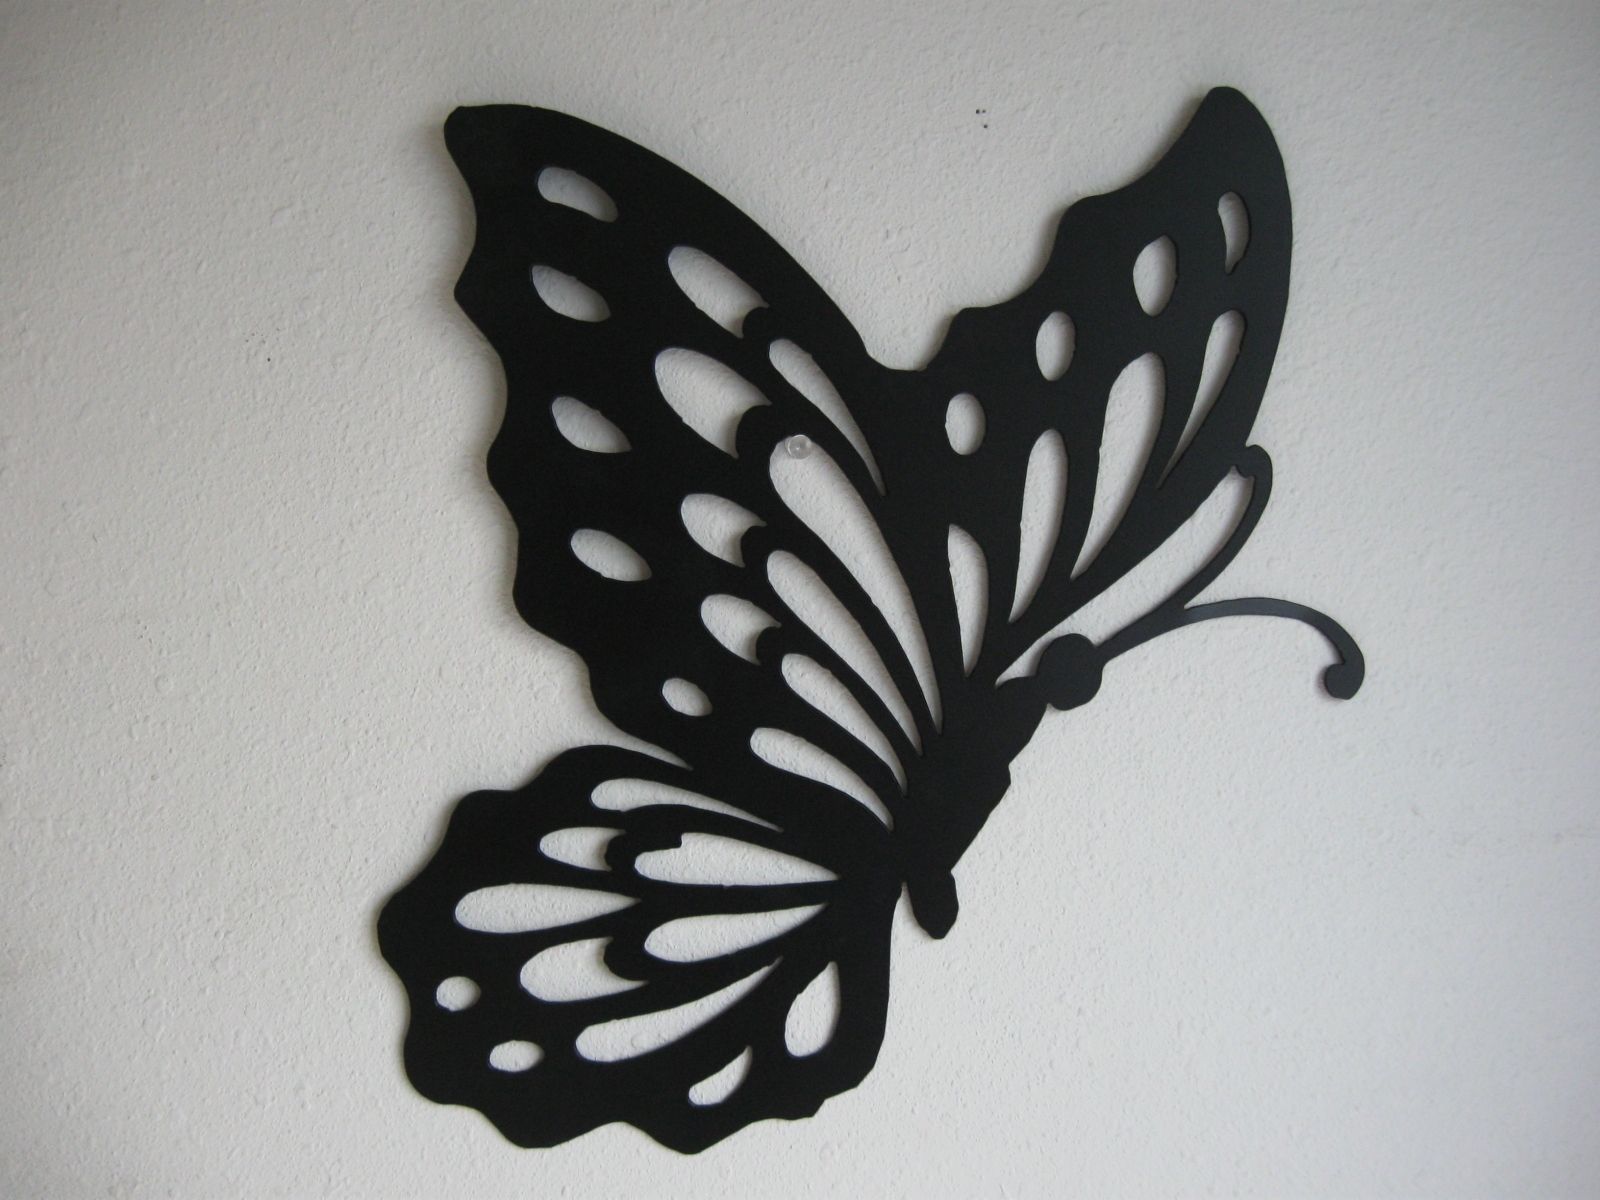 Black Metal Butterfly Wall Decor Cool Black Metal Wall Decor – Home Pertaining To Black Metal Wall Art (View 5 of 20)